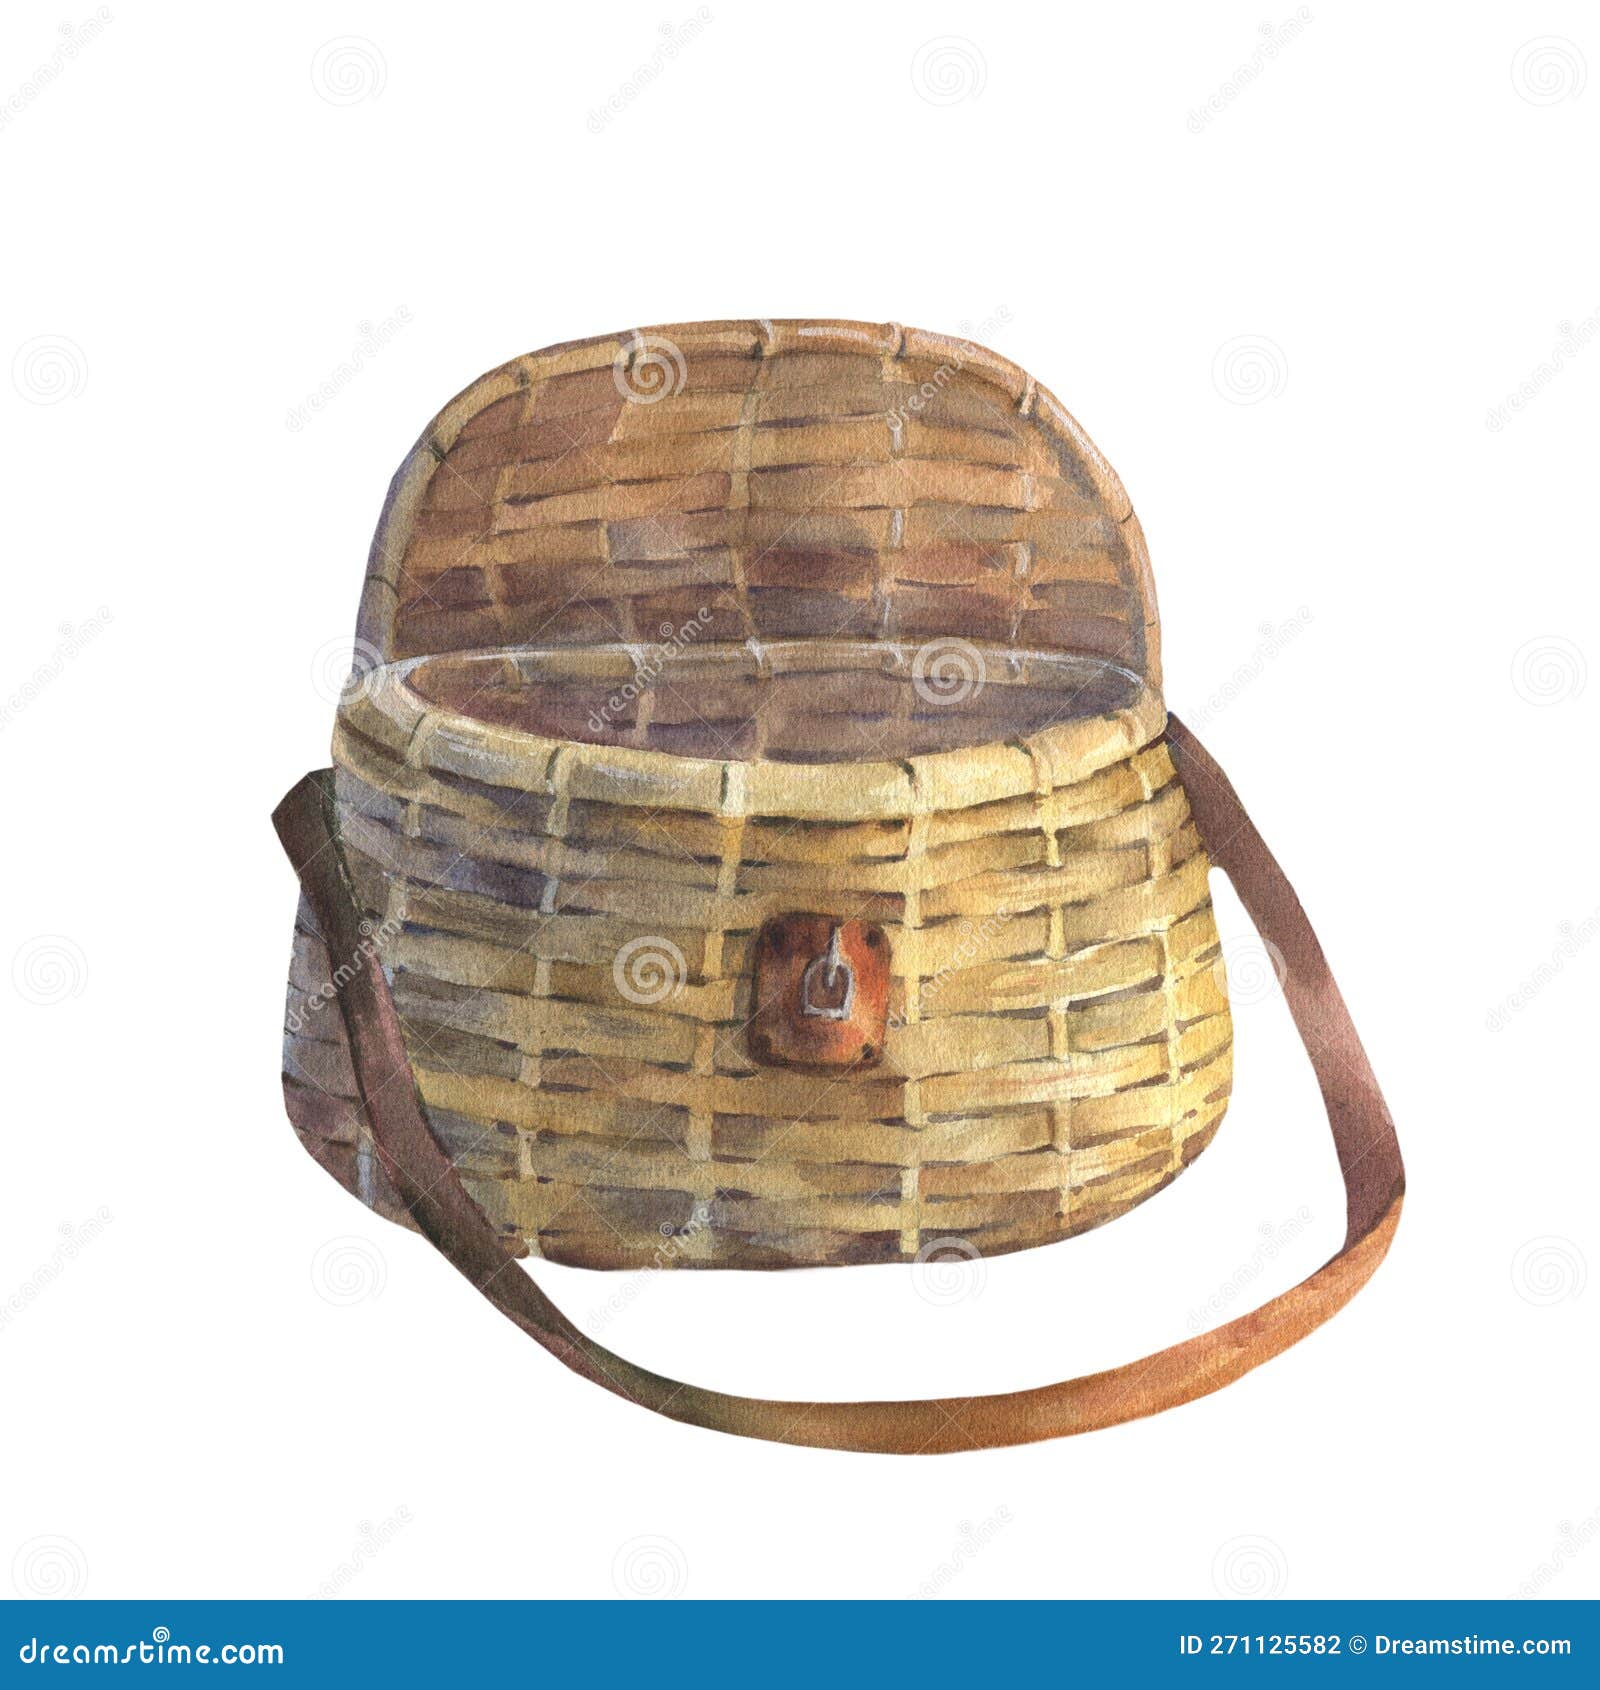 Fisherman S Basket, Used in Fly Fishing, Vintage Watercolor Illustration,  Isolated on White Background. for Business Stock Illustration -  Illustration of aquarelle, vintage: 271125582